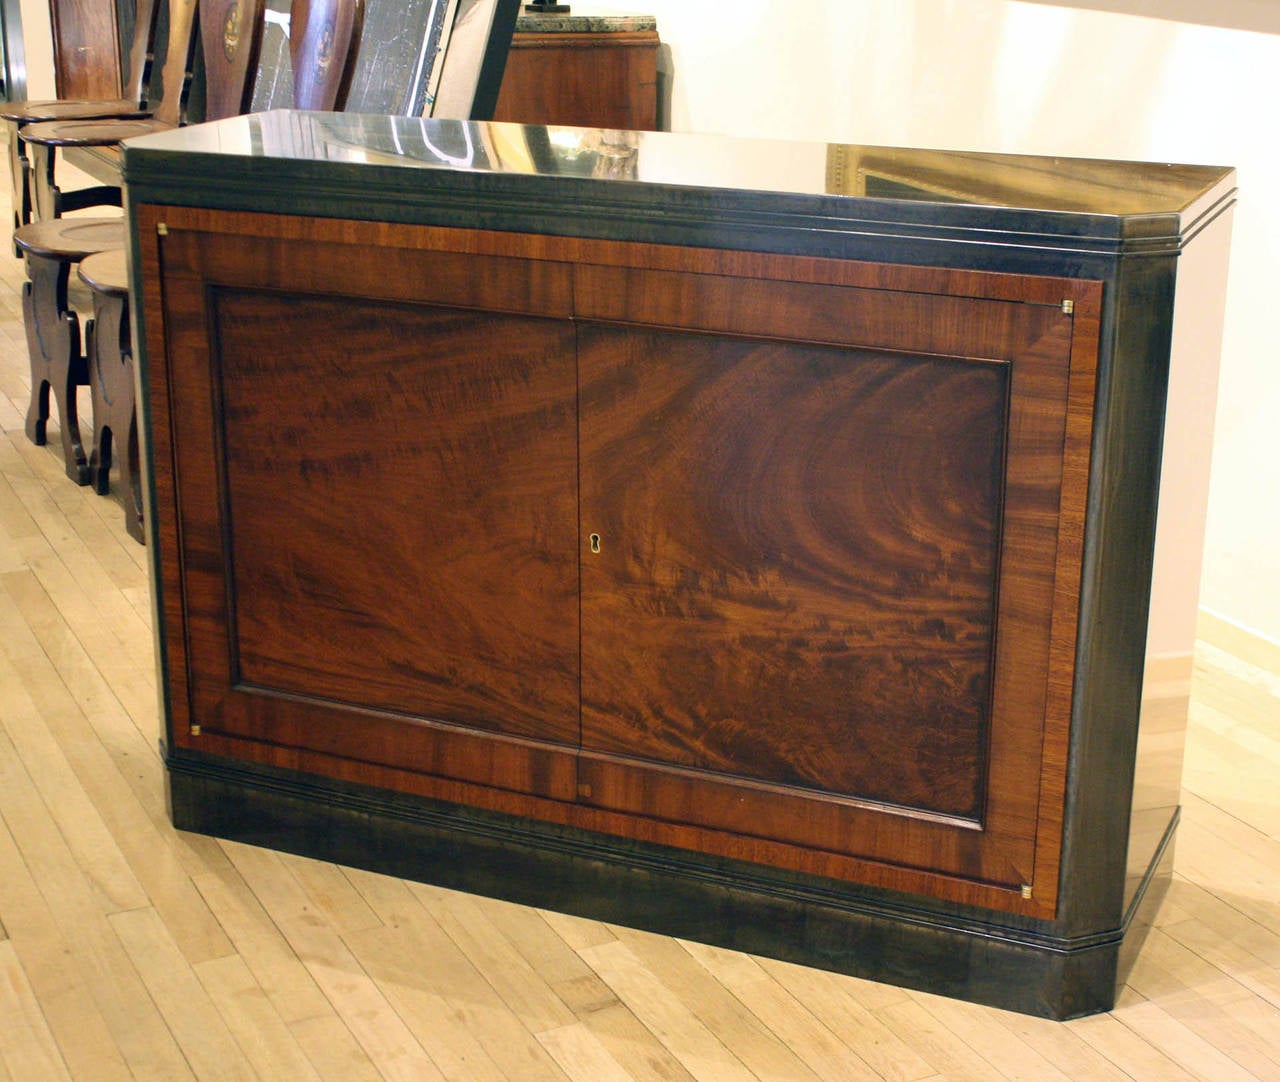 Pair of mahogany and patinated steel cabinets
Contemporary steel case, the doors, English, circa 1800
Available as custom order.